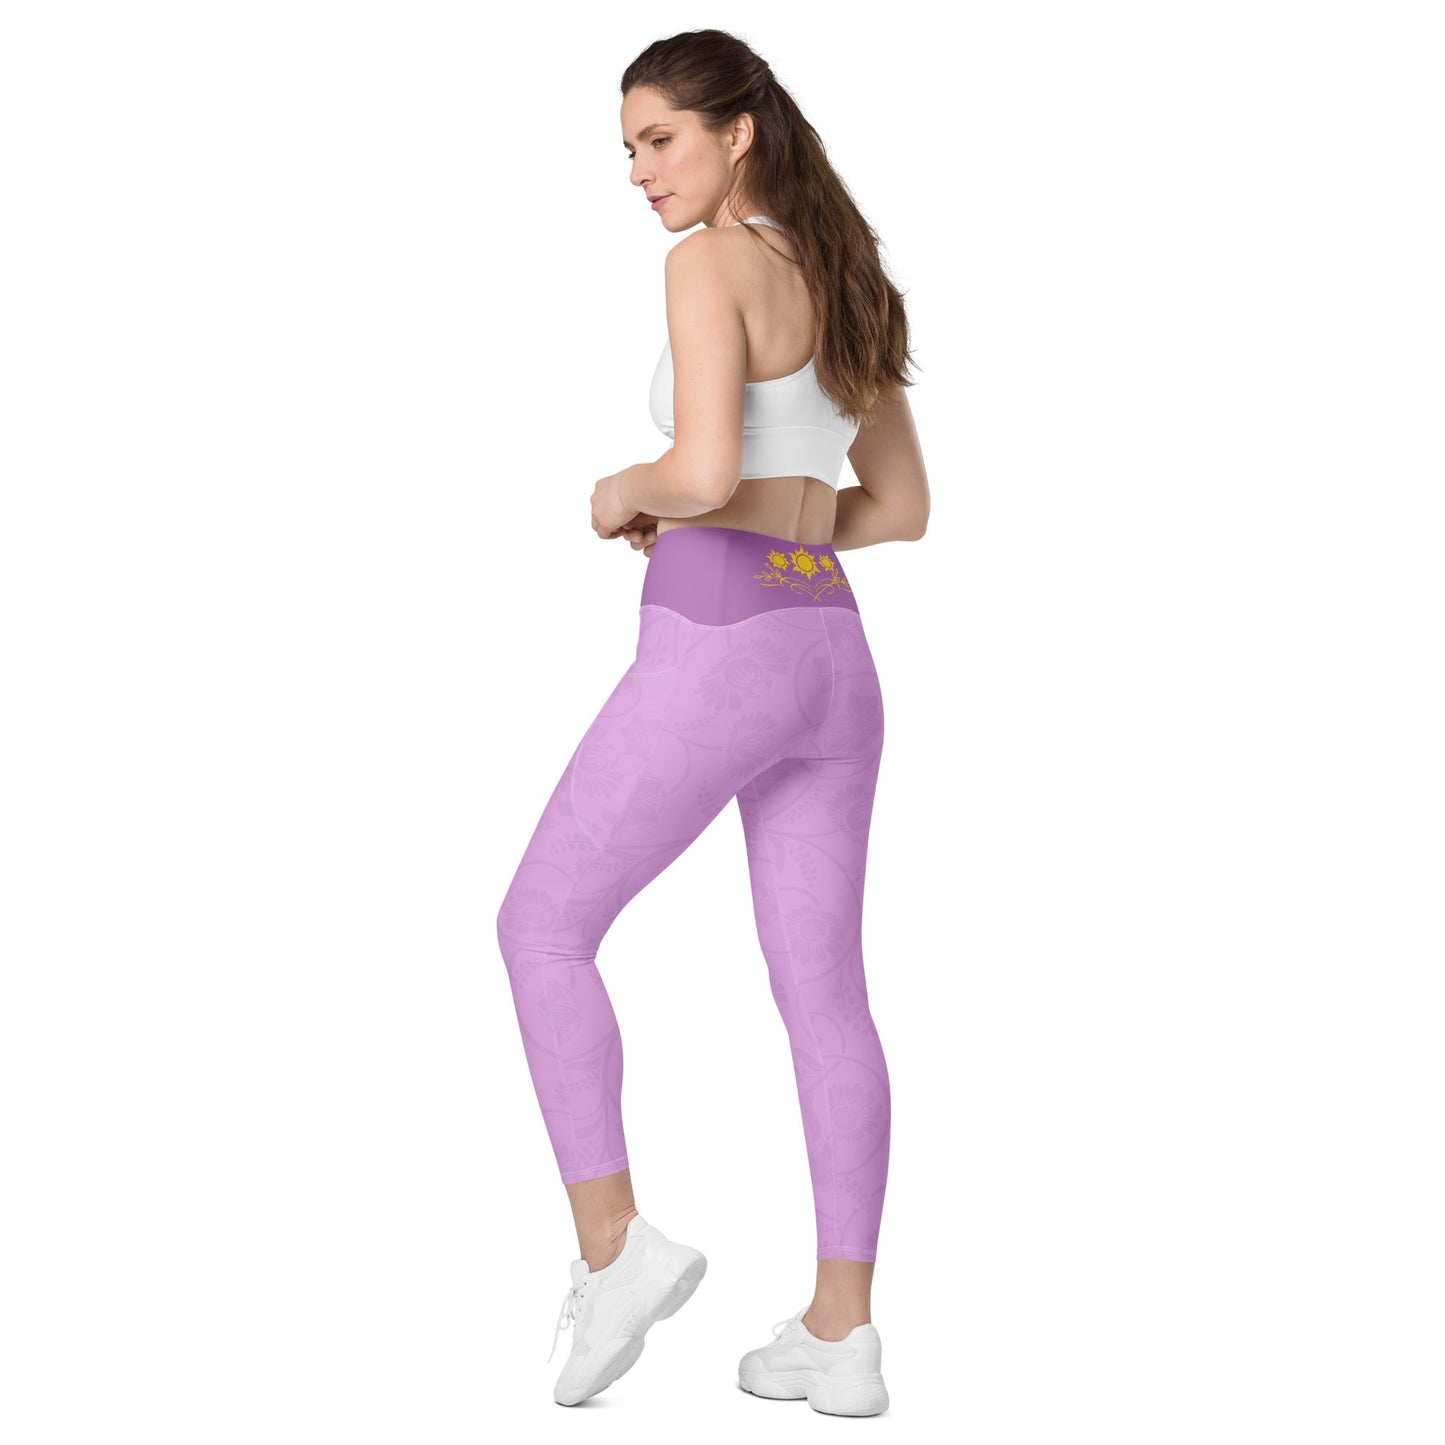 Rapunzel Inspired Leggings with pockets athleisurecosplayWrong Lever Clothing